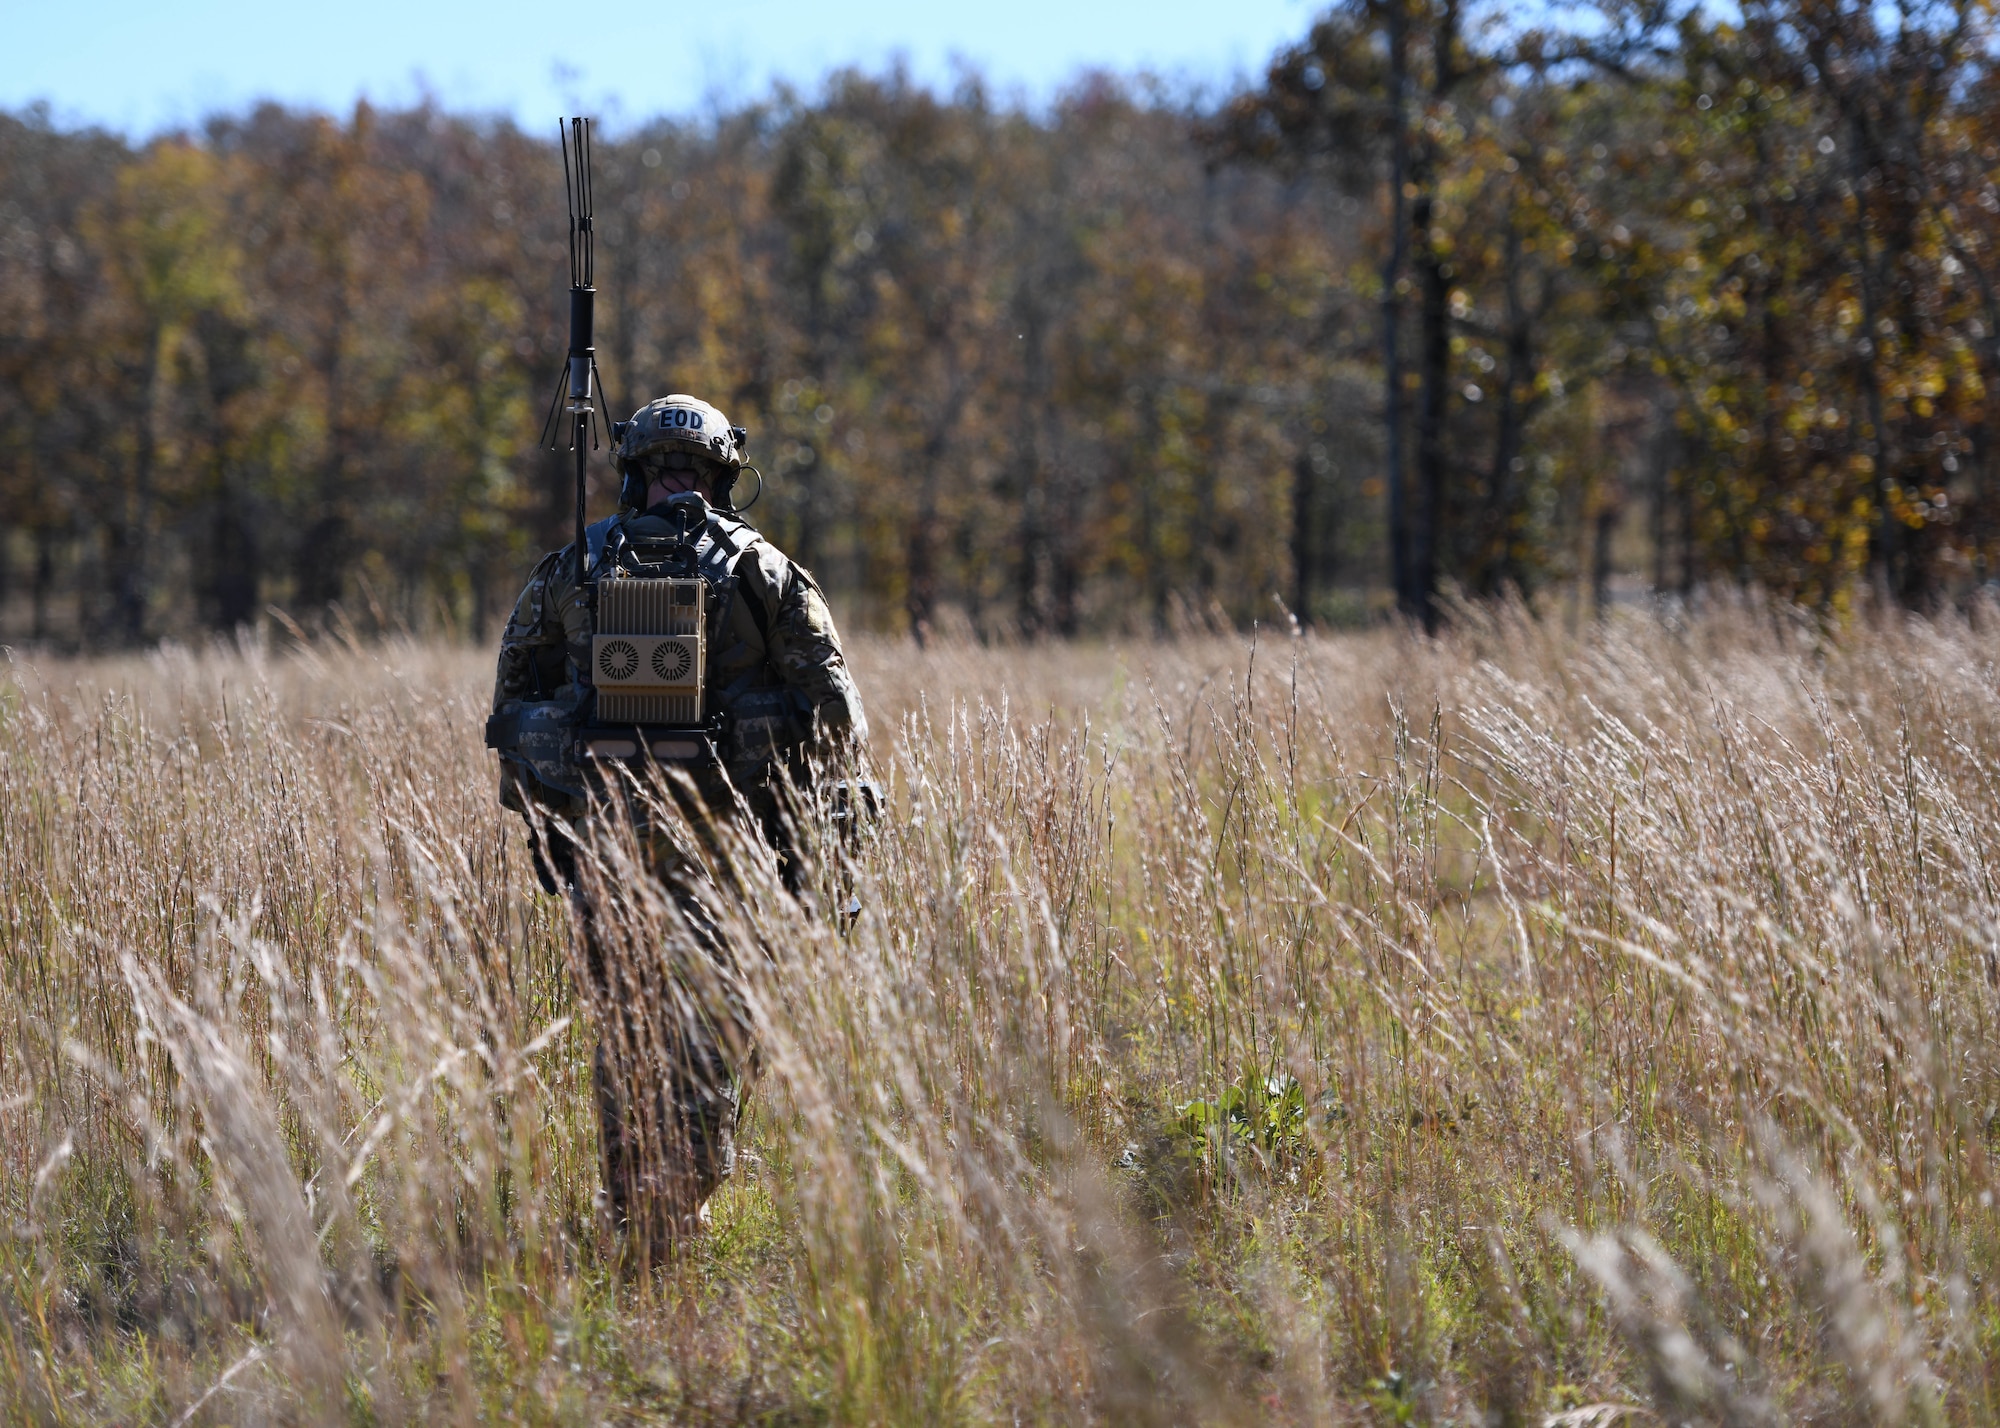 U.S. Air Force Staff Sgt. Htyler Kelley, 19th Civil Engineer Squadron Explosive Ordnance Disposal technician, uses a metal detector to search for simulated improvised explosive devices during a Joint training exercise at Camp Robinson, Arkansas, Oct. 22, 2019.